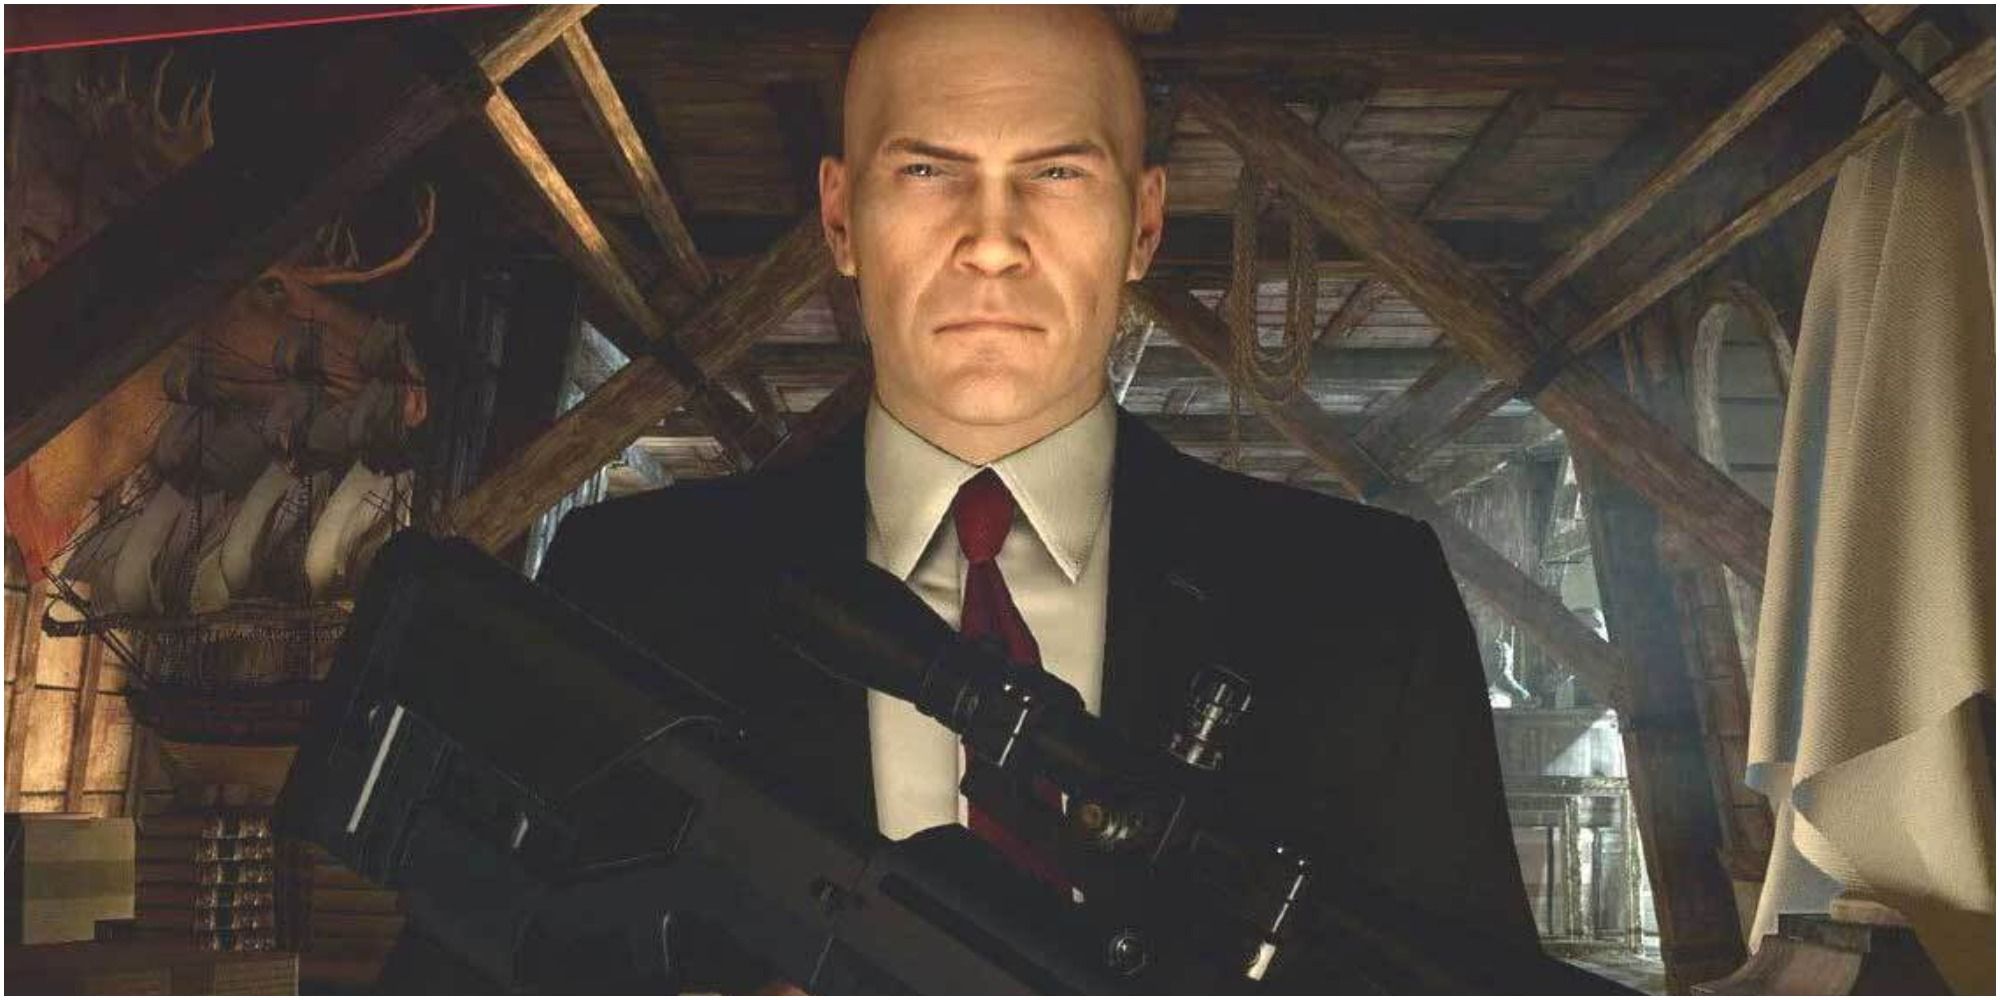 hitman-3 agent 47 with sniper rifle